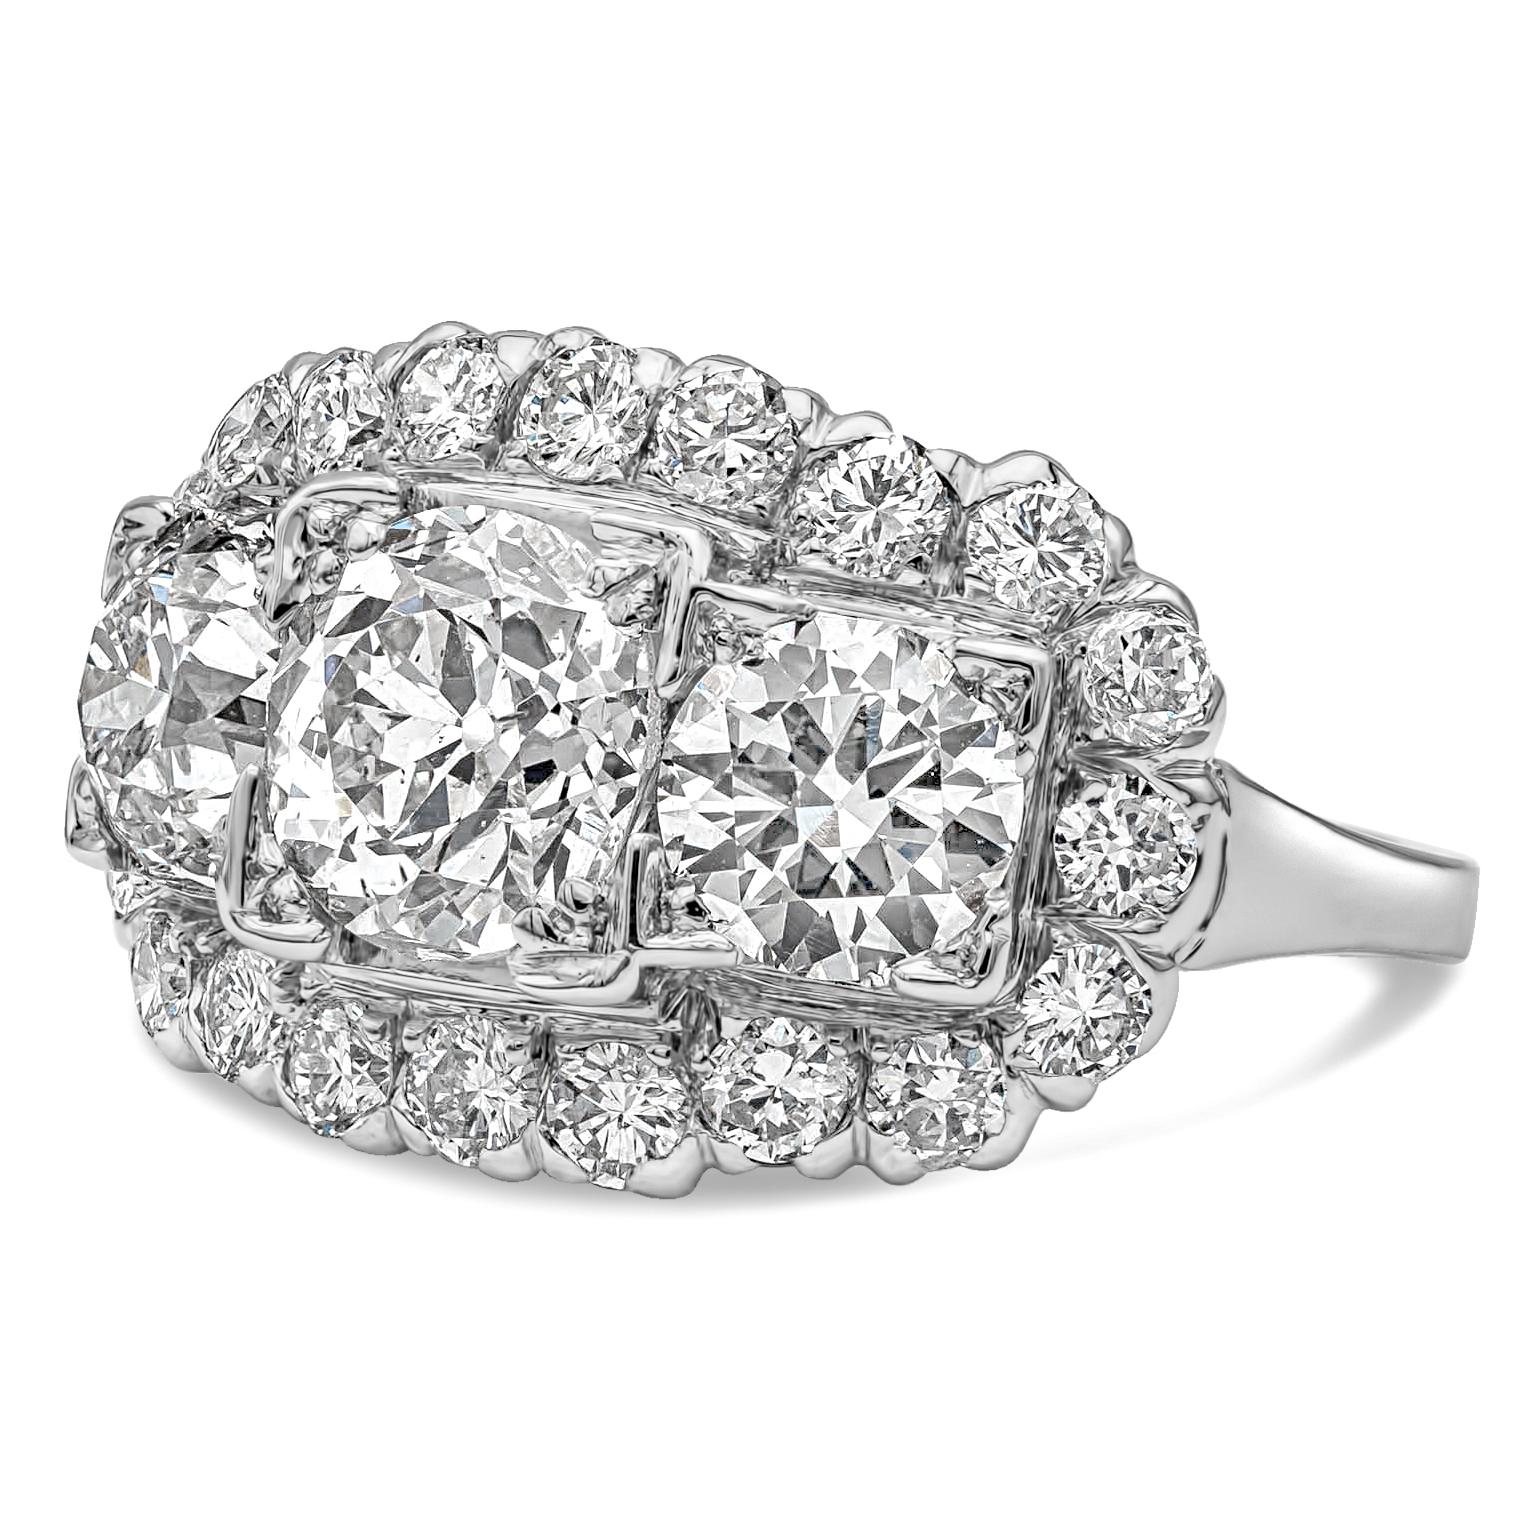 A charming antique engagement ring style showcasing a three stone design, features a Old European Cut diamond center stone weighing 1.64 carats total, flanked by brilliant round diamond on each side weighing 1.40 carats total. Accented by brilliant